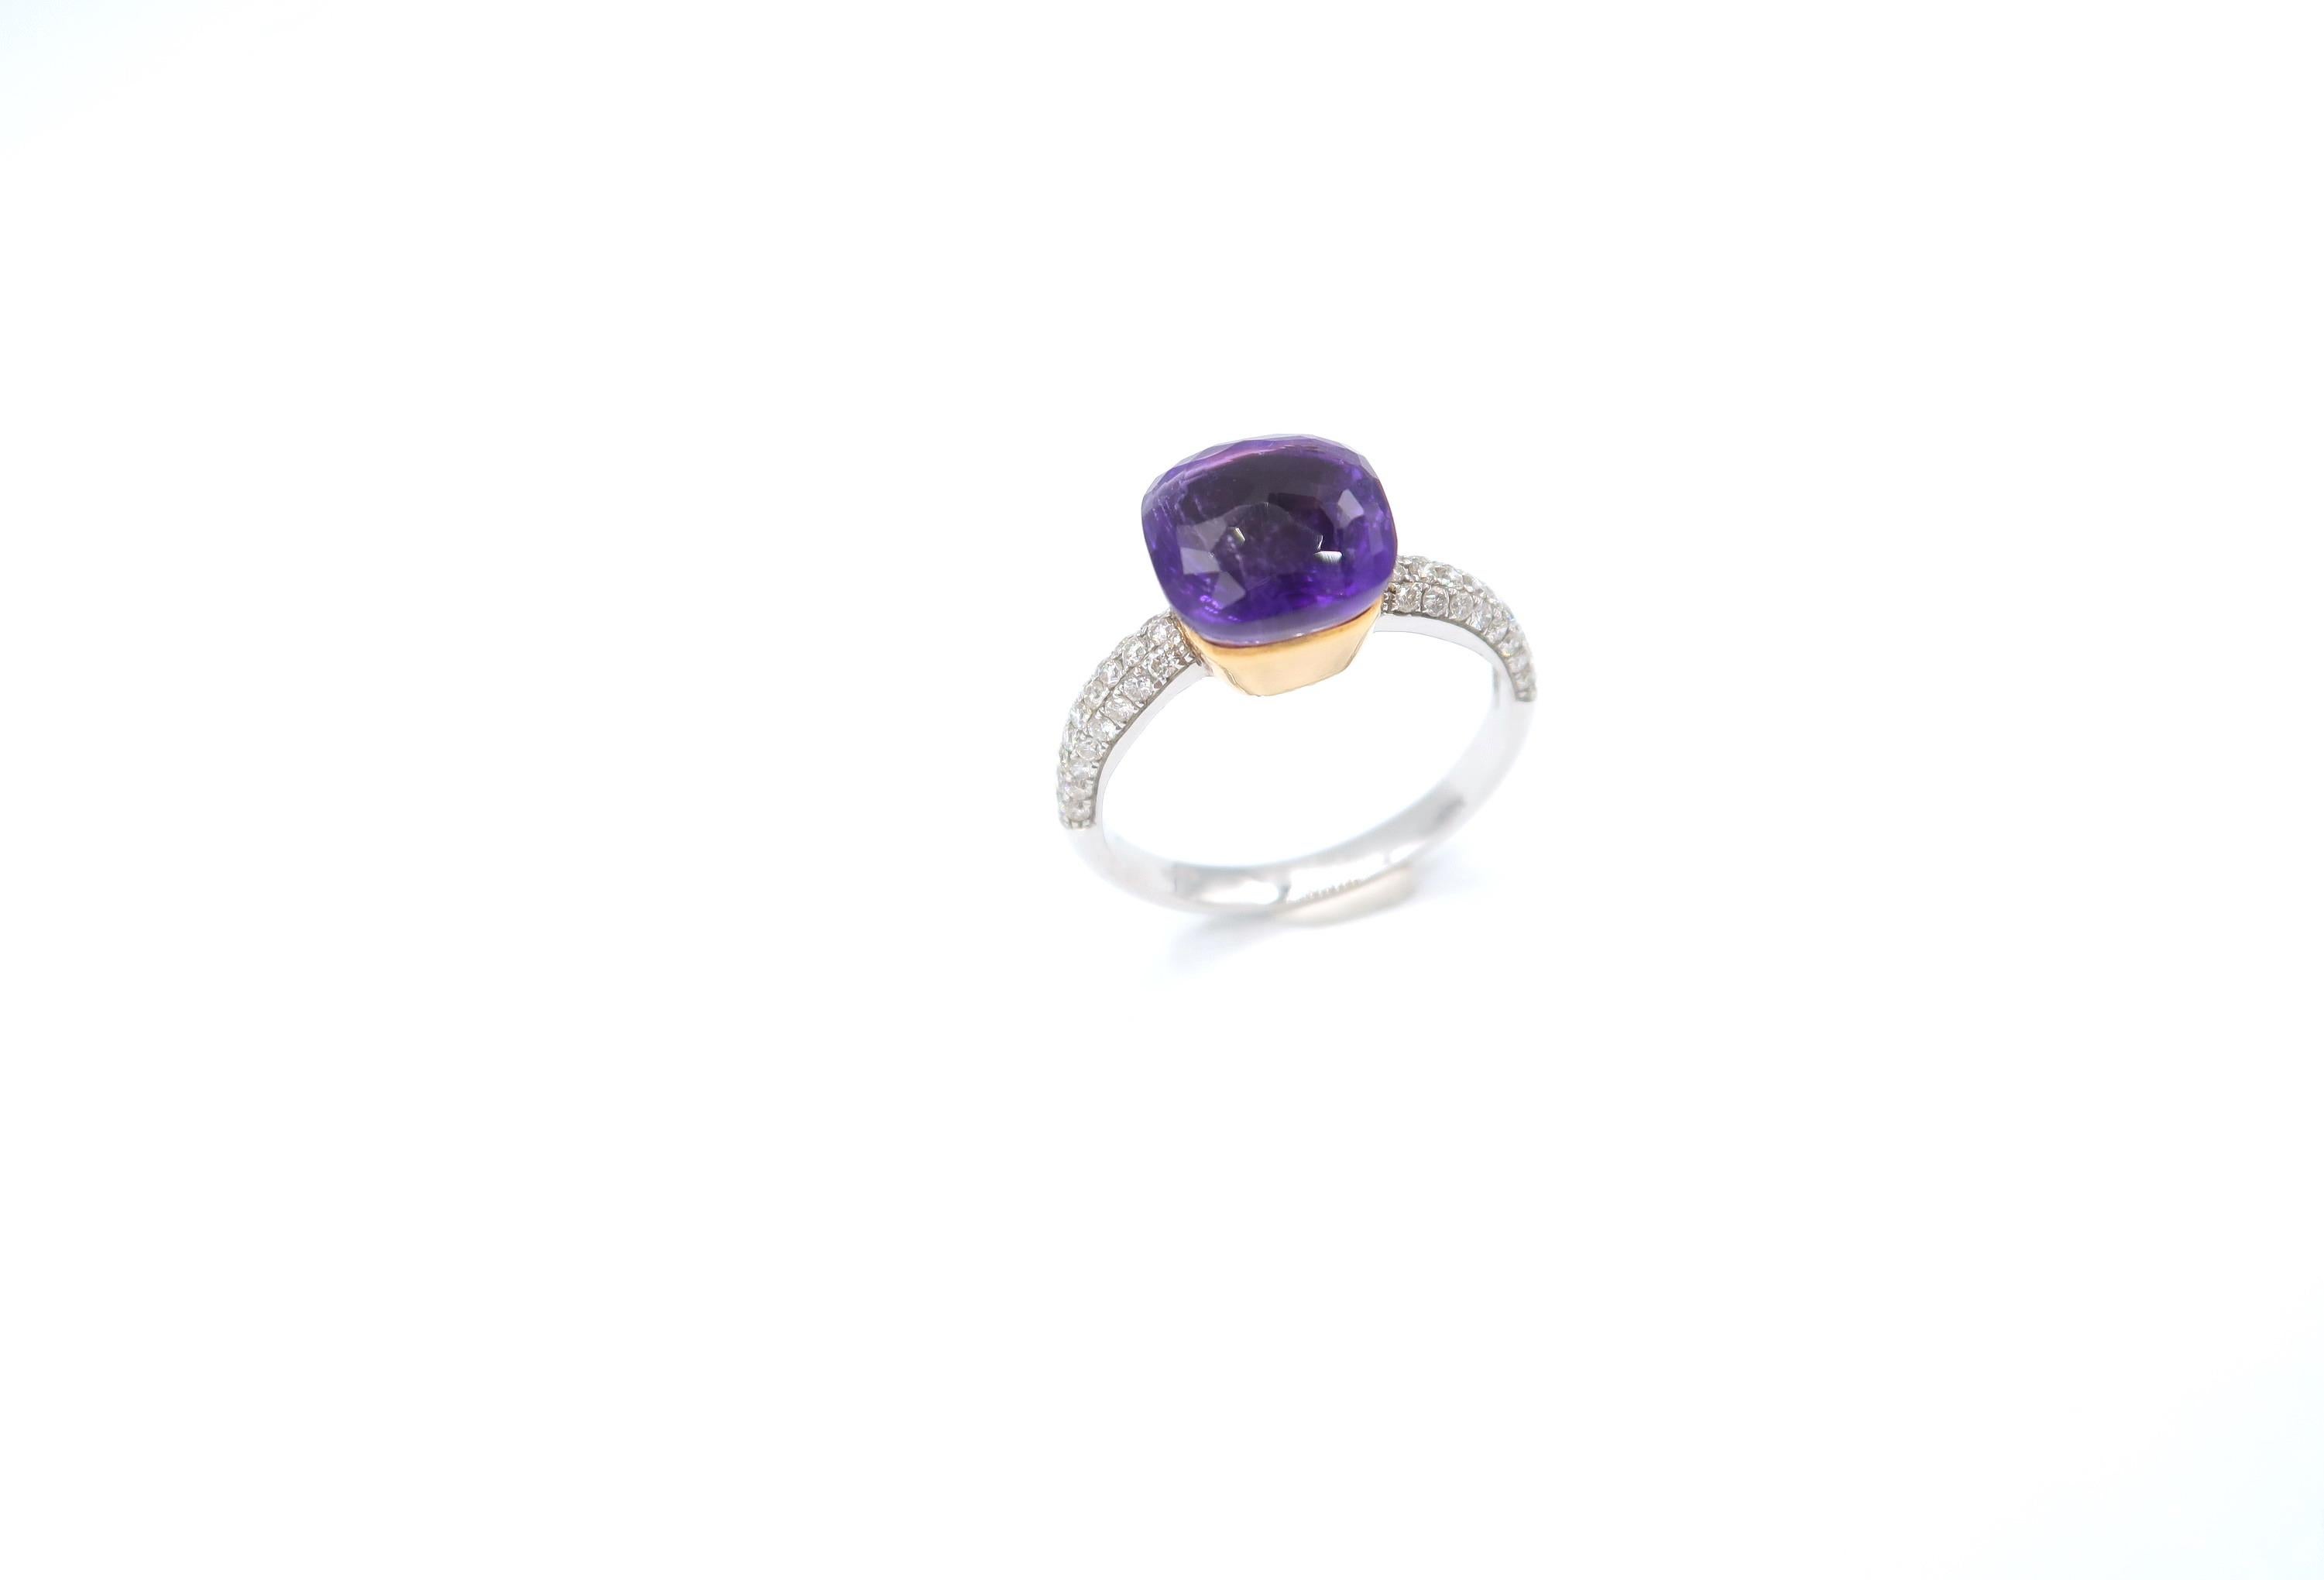 Special Faceted Amethyst Diamond Pavé Ring in 18K Gold

Amethyst: 4.81 ct
Diamond: 0.47 ct
Gold: 18K Gold 8.76 g

Ring Size: 58 / US 8.5 / UK R
Please let us know should you wish to have the ring resized.